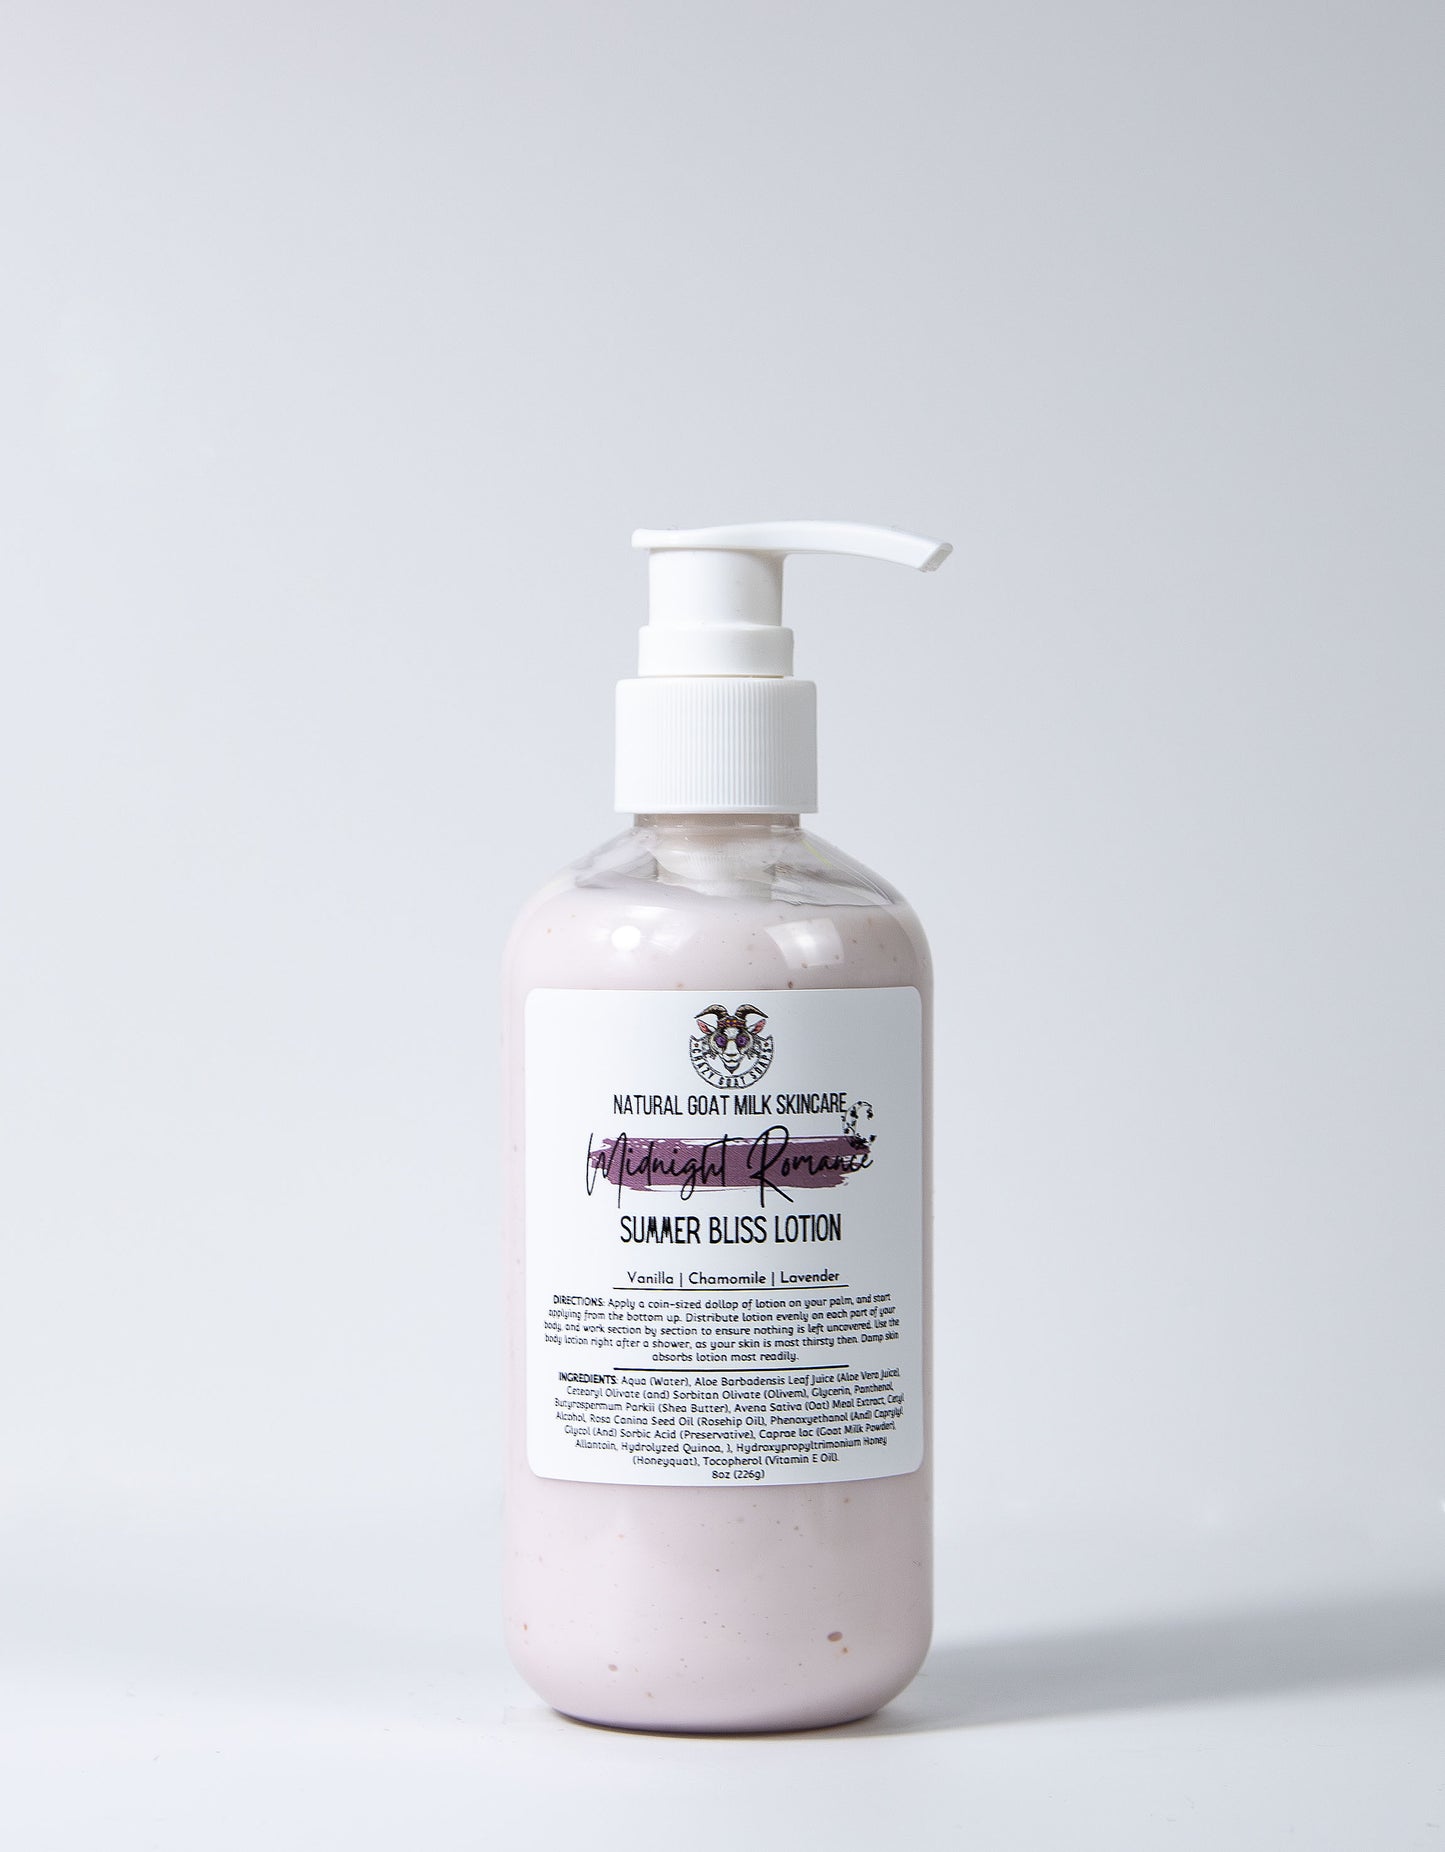 MIDNIGHT ROMANCE SUMMER BLISS LOTION (8oz & 4oz To Be Discontinued)